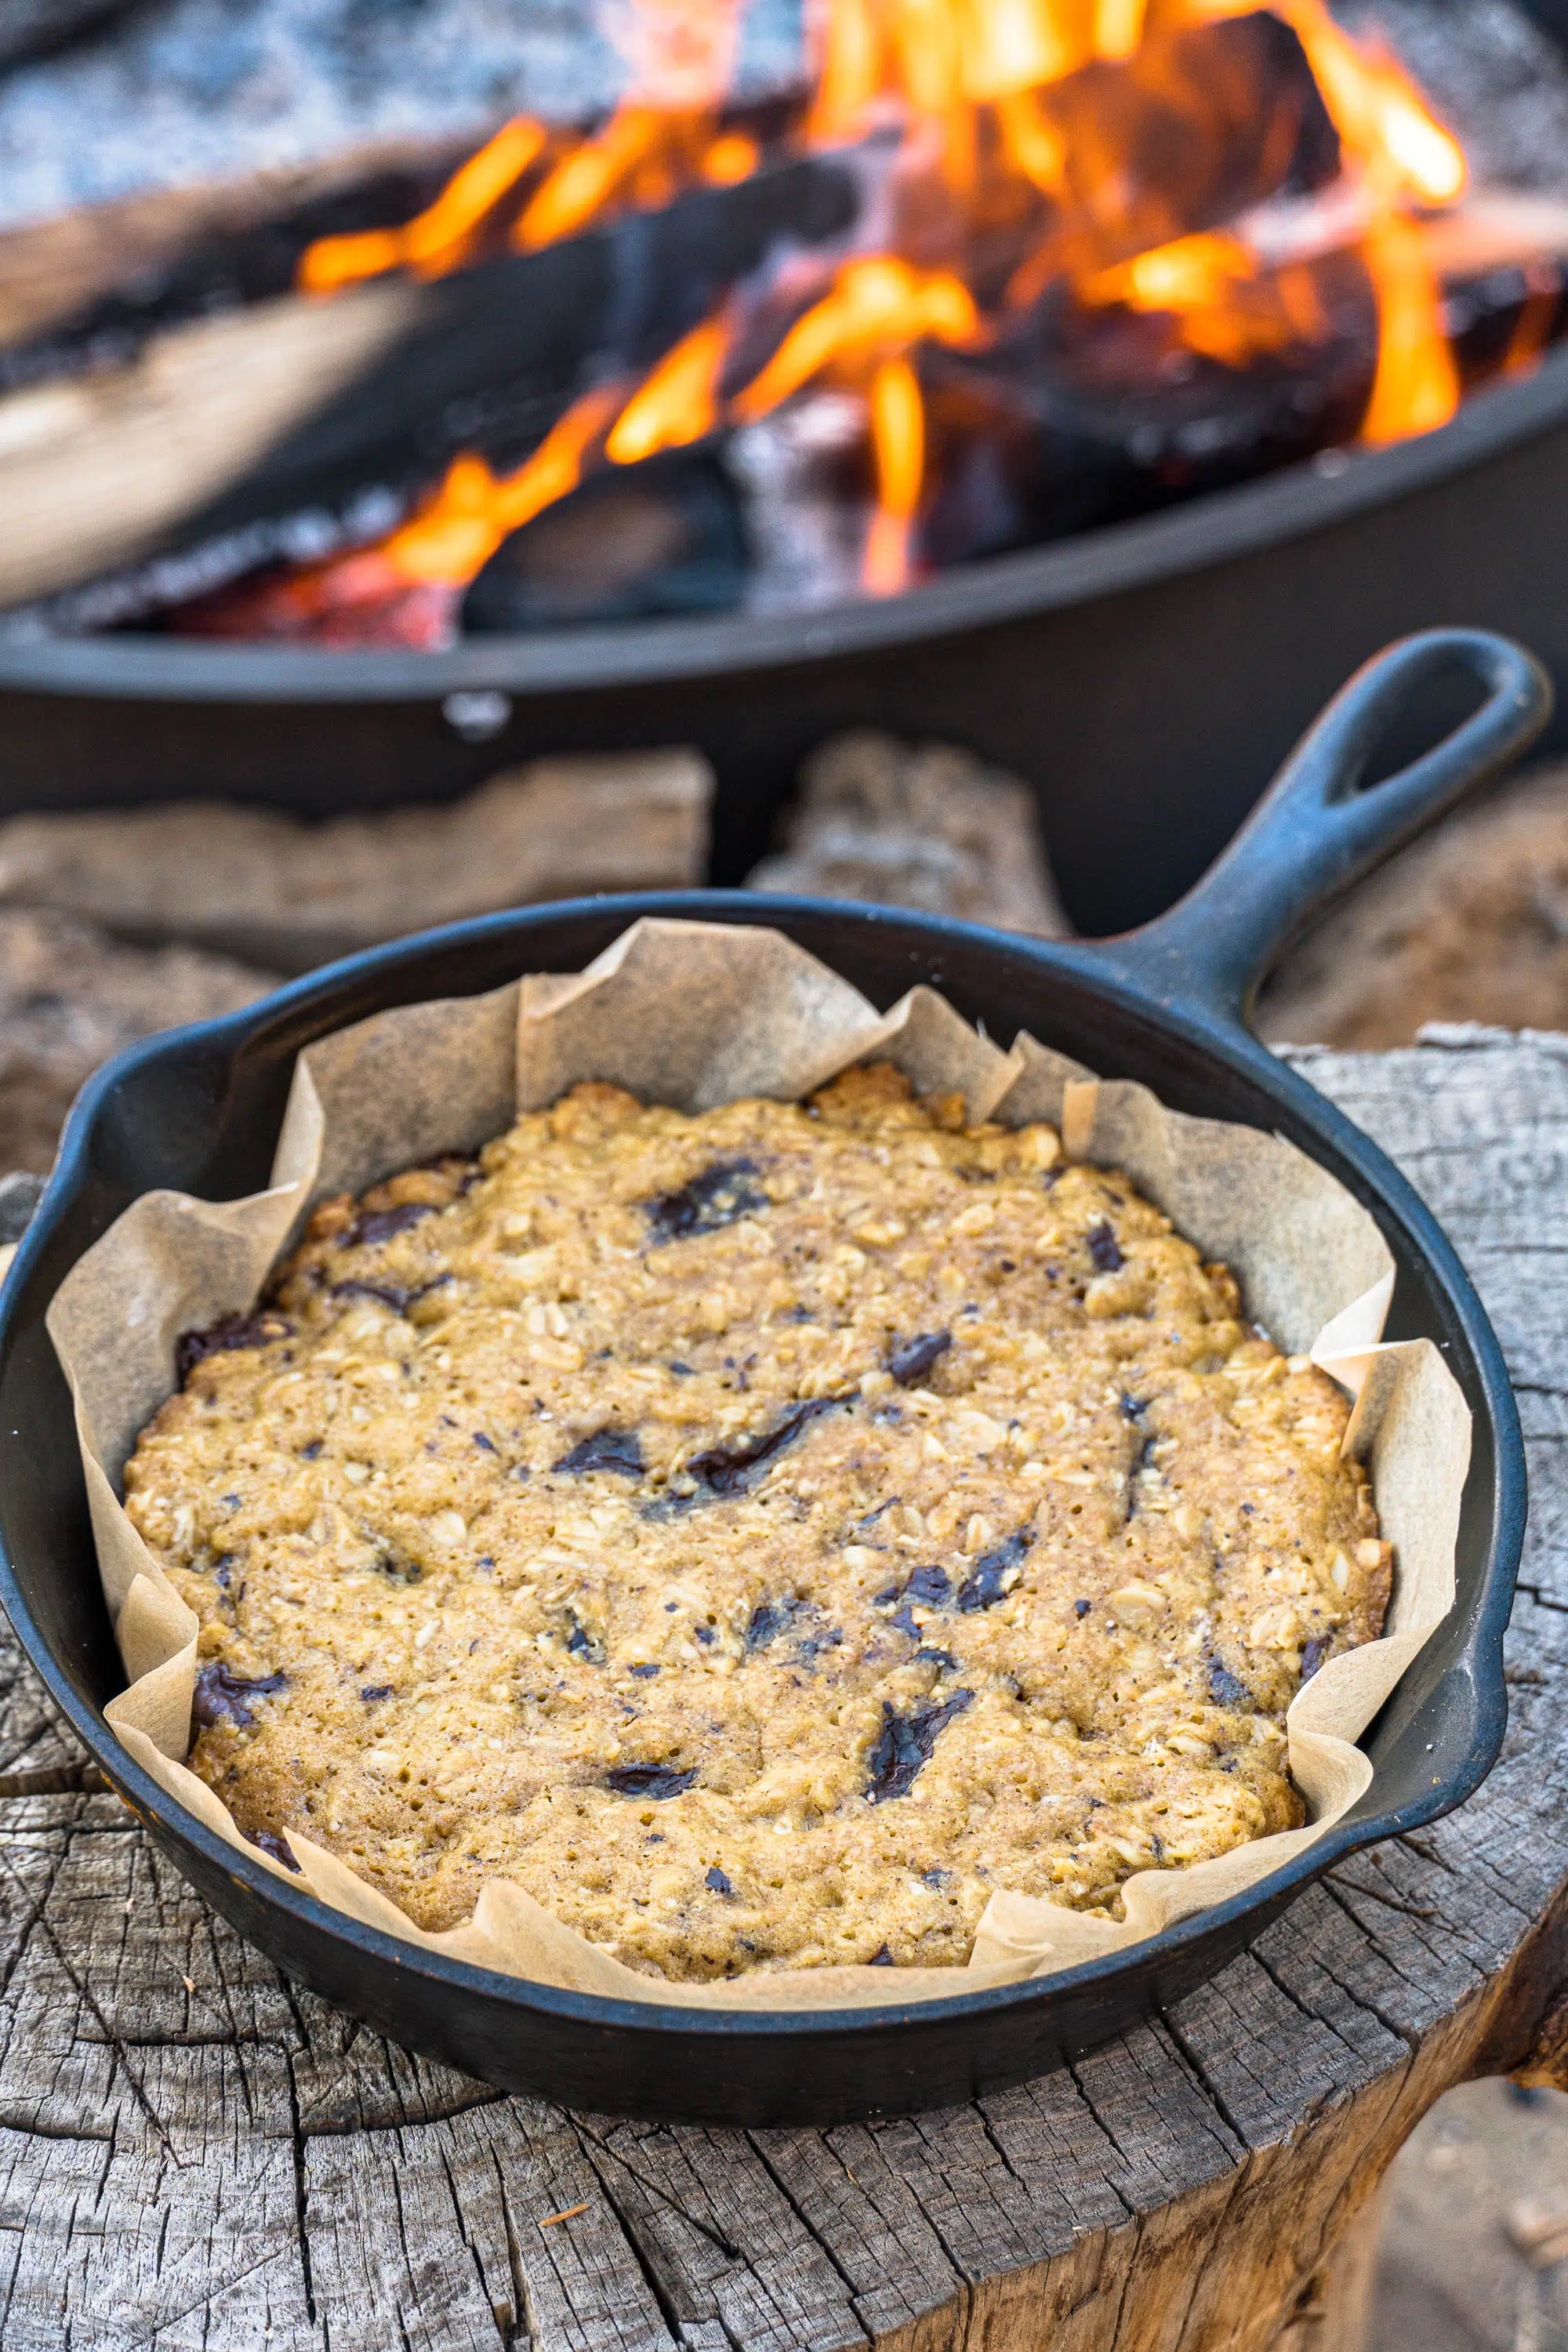 A chocolate chip cookie in a cast iron skillet set on a wood log.